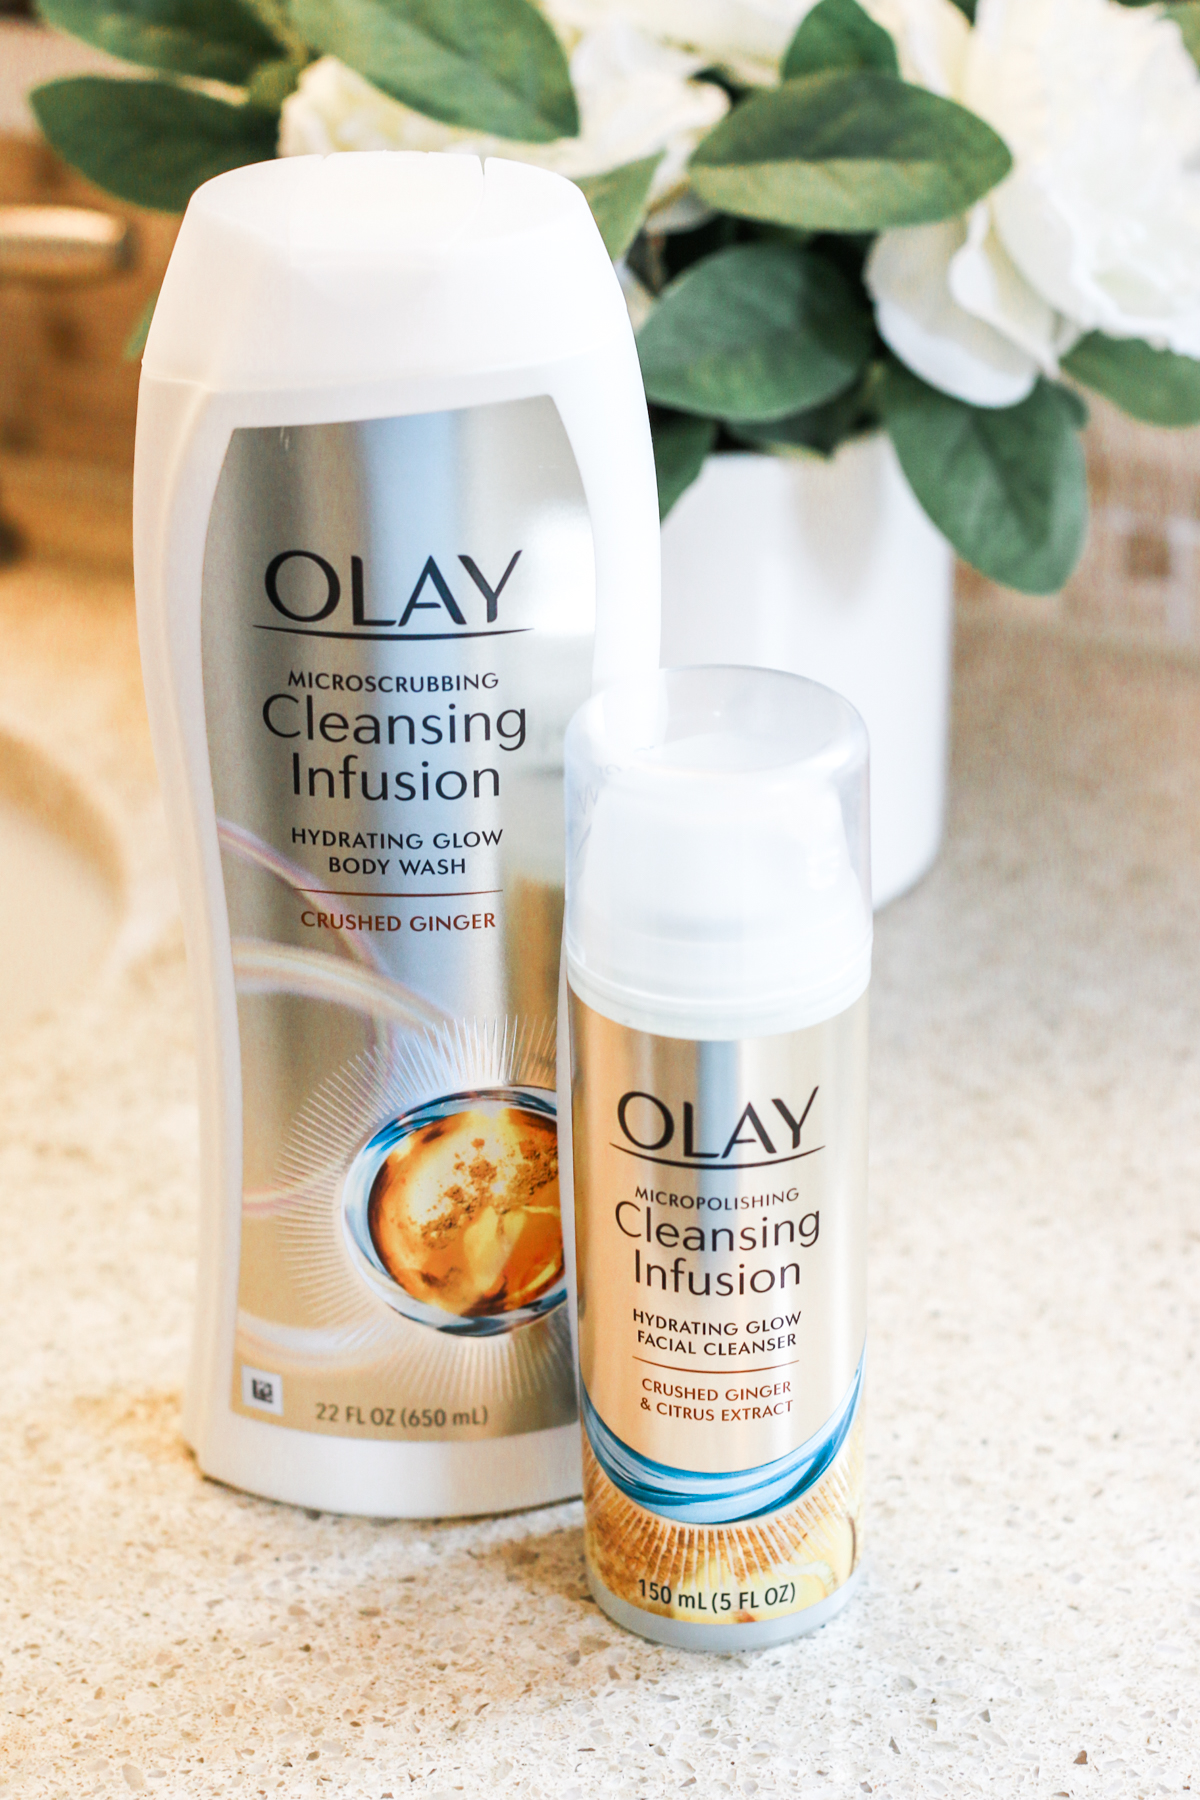 Olay Cleansing Infusions review, How to Get Glowing Spring Skin with Olay Cleansing Infusions by fashion and southern lifestyle blogger Stephanie Ziajka, Olay Micropolishing Cleansing Infusion Hydrating Glow Facial Cleanser with Crushed Ginger and Citrus Extract, Olay Microscrubbing Cleansing Infusion Hydrating Glow Body Wash with Crushed Ginger